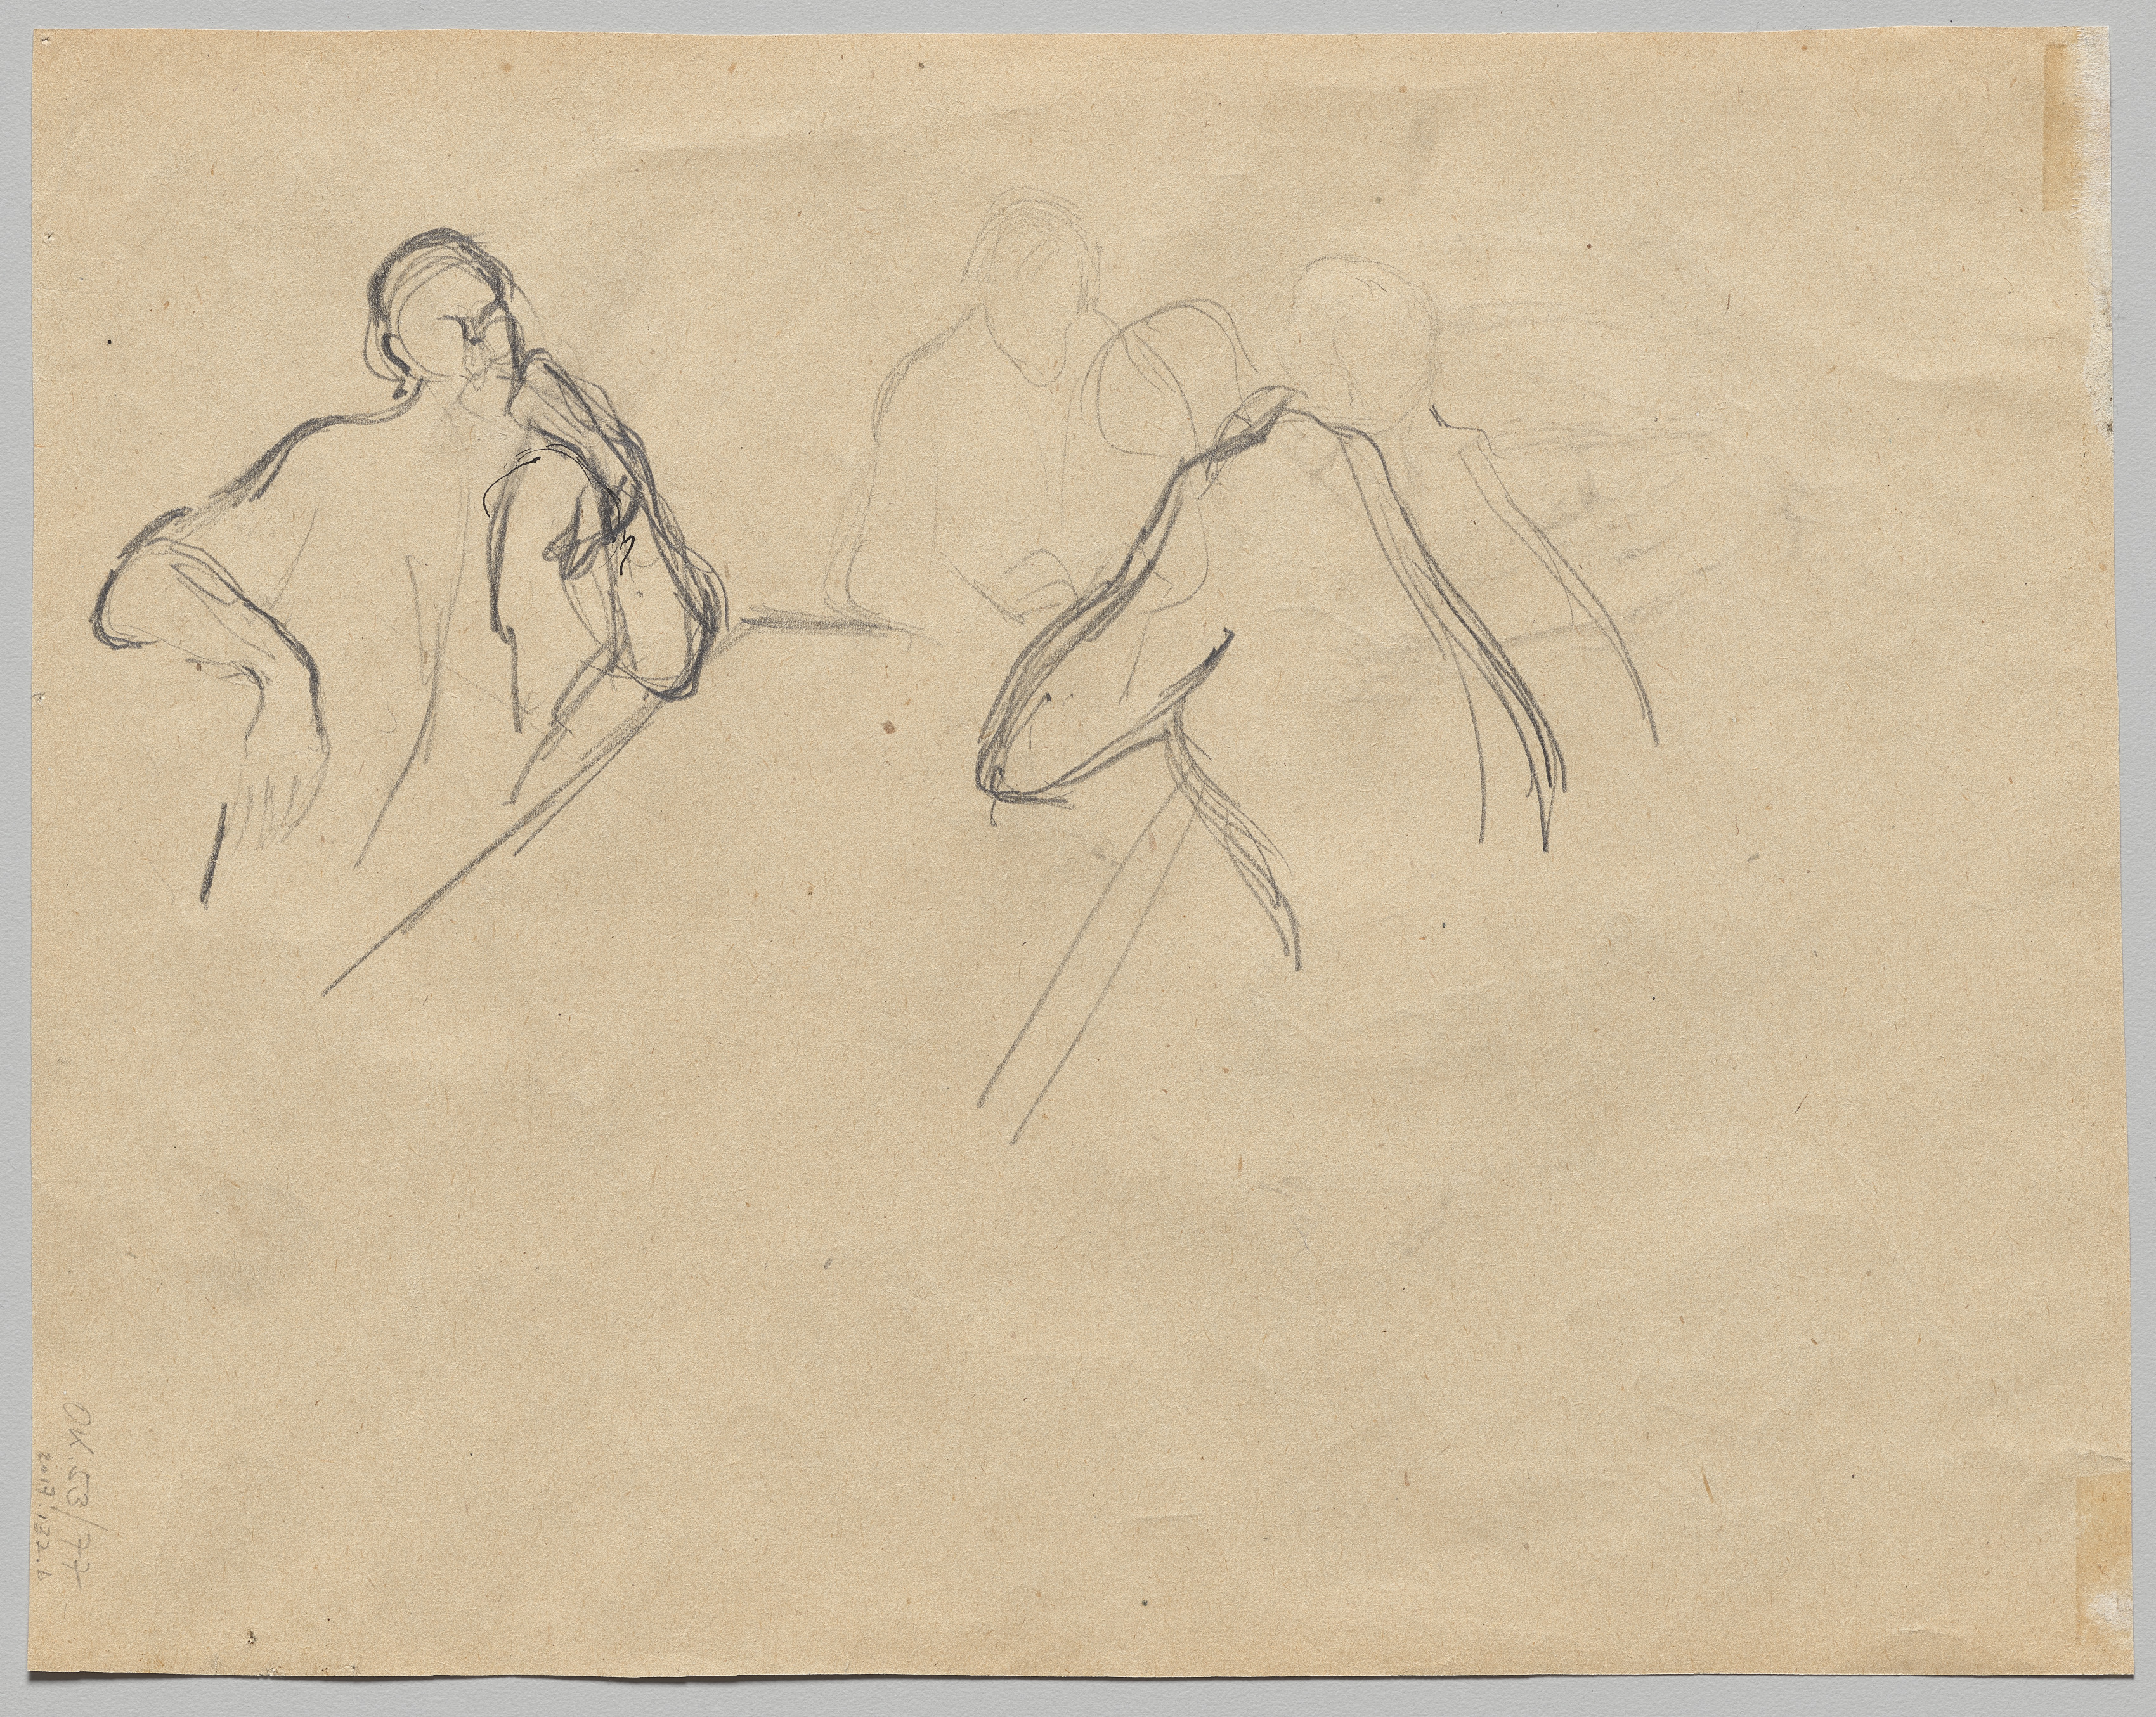 Budapest Ghetto Series 1944: Four Figures Seated at a Table (verso)